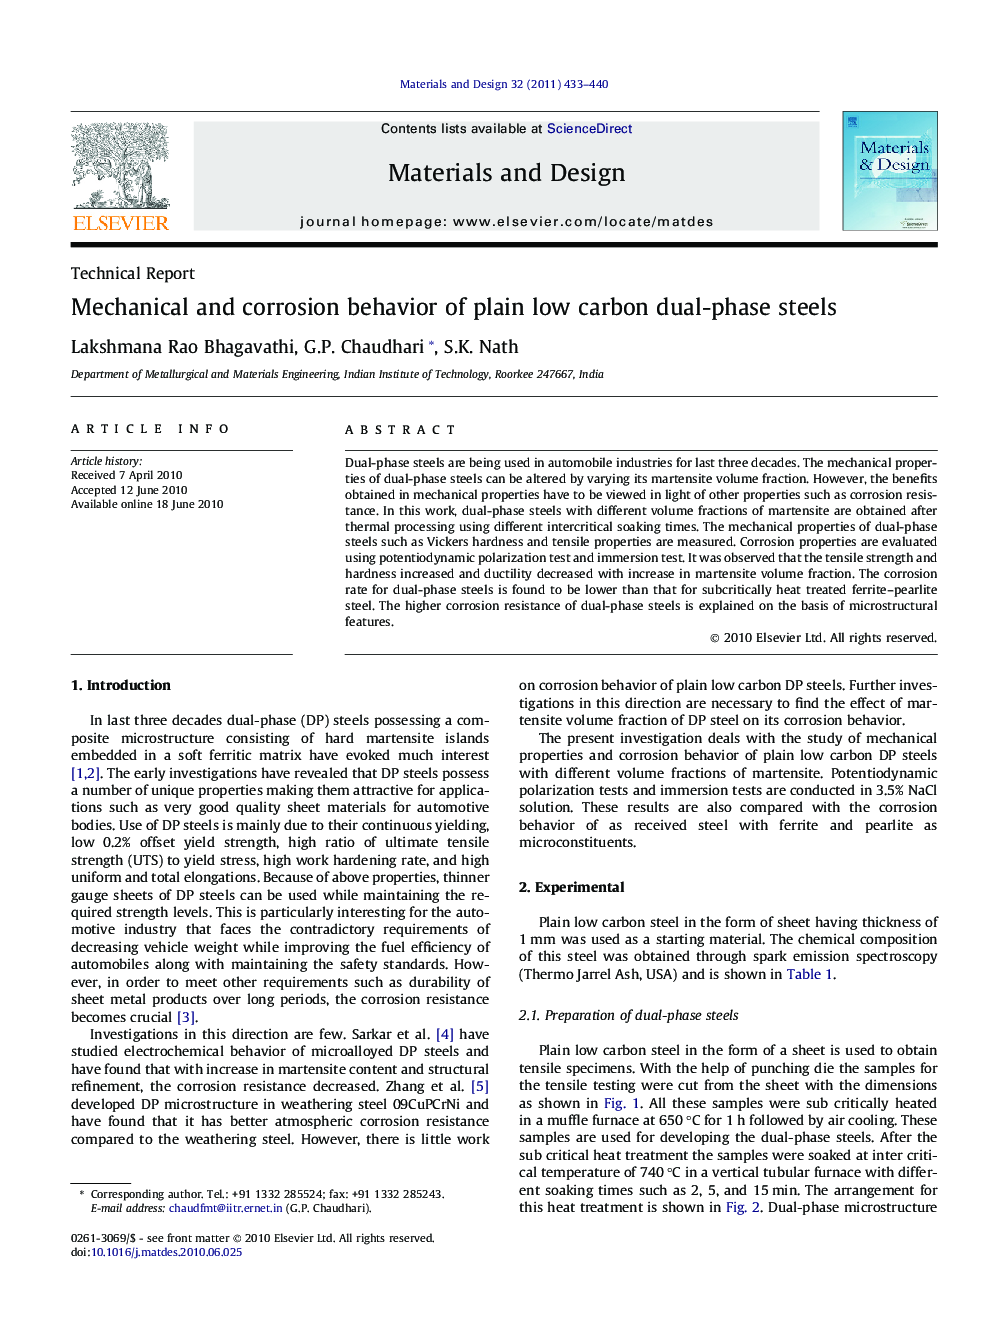 Mechanical and corrosion behavior of plain low carbon dual-phase steels